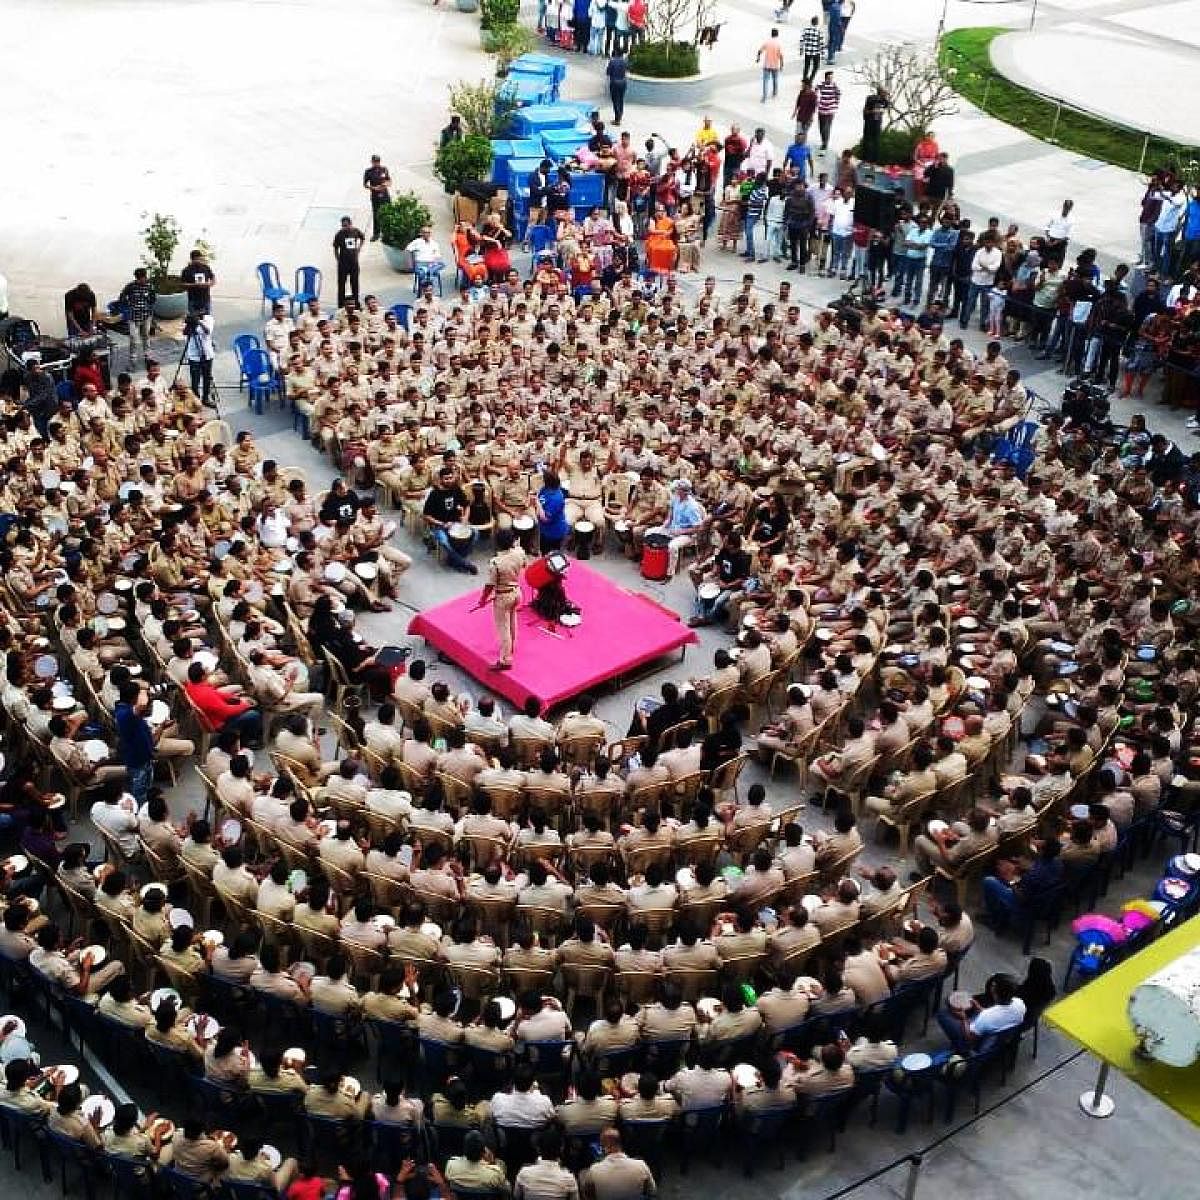 On Sunday, over 600 policemen and women participated in an hour-long drum jam at Orion Mall in Yeshwantpur.